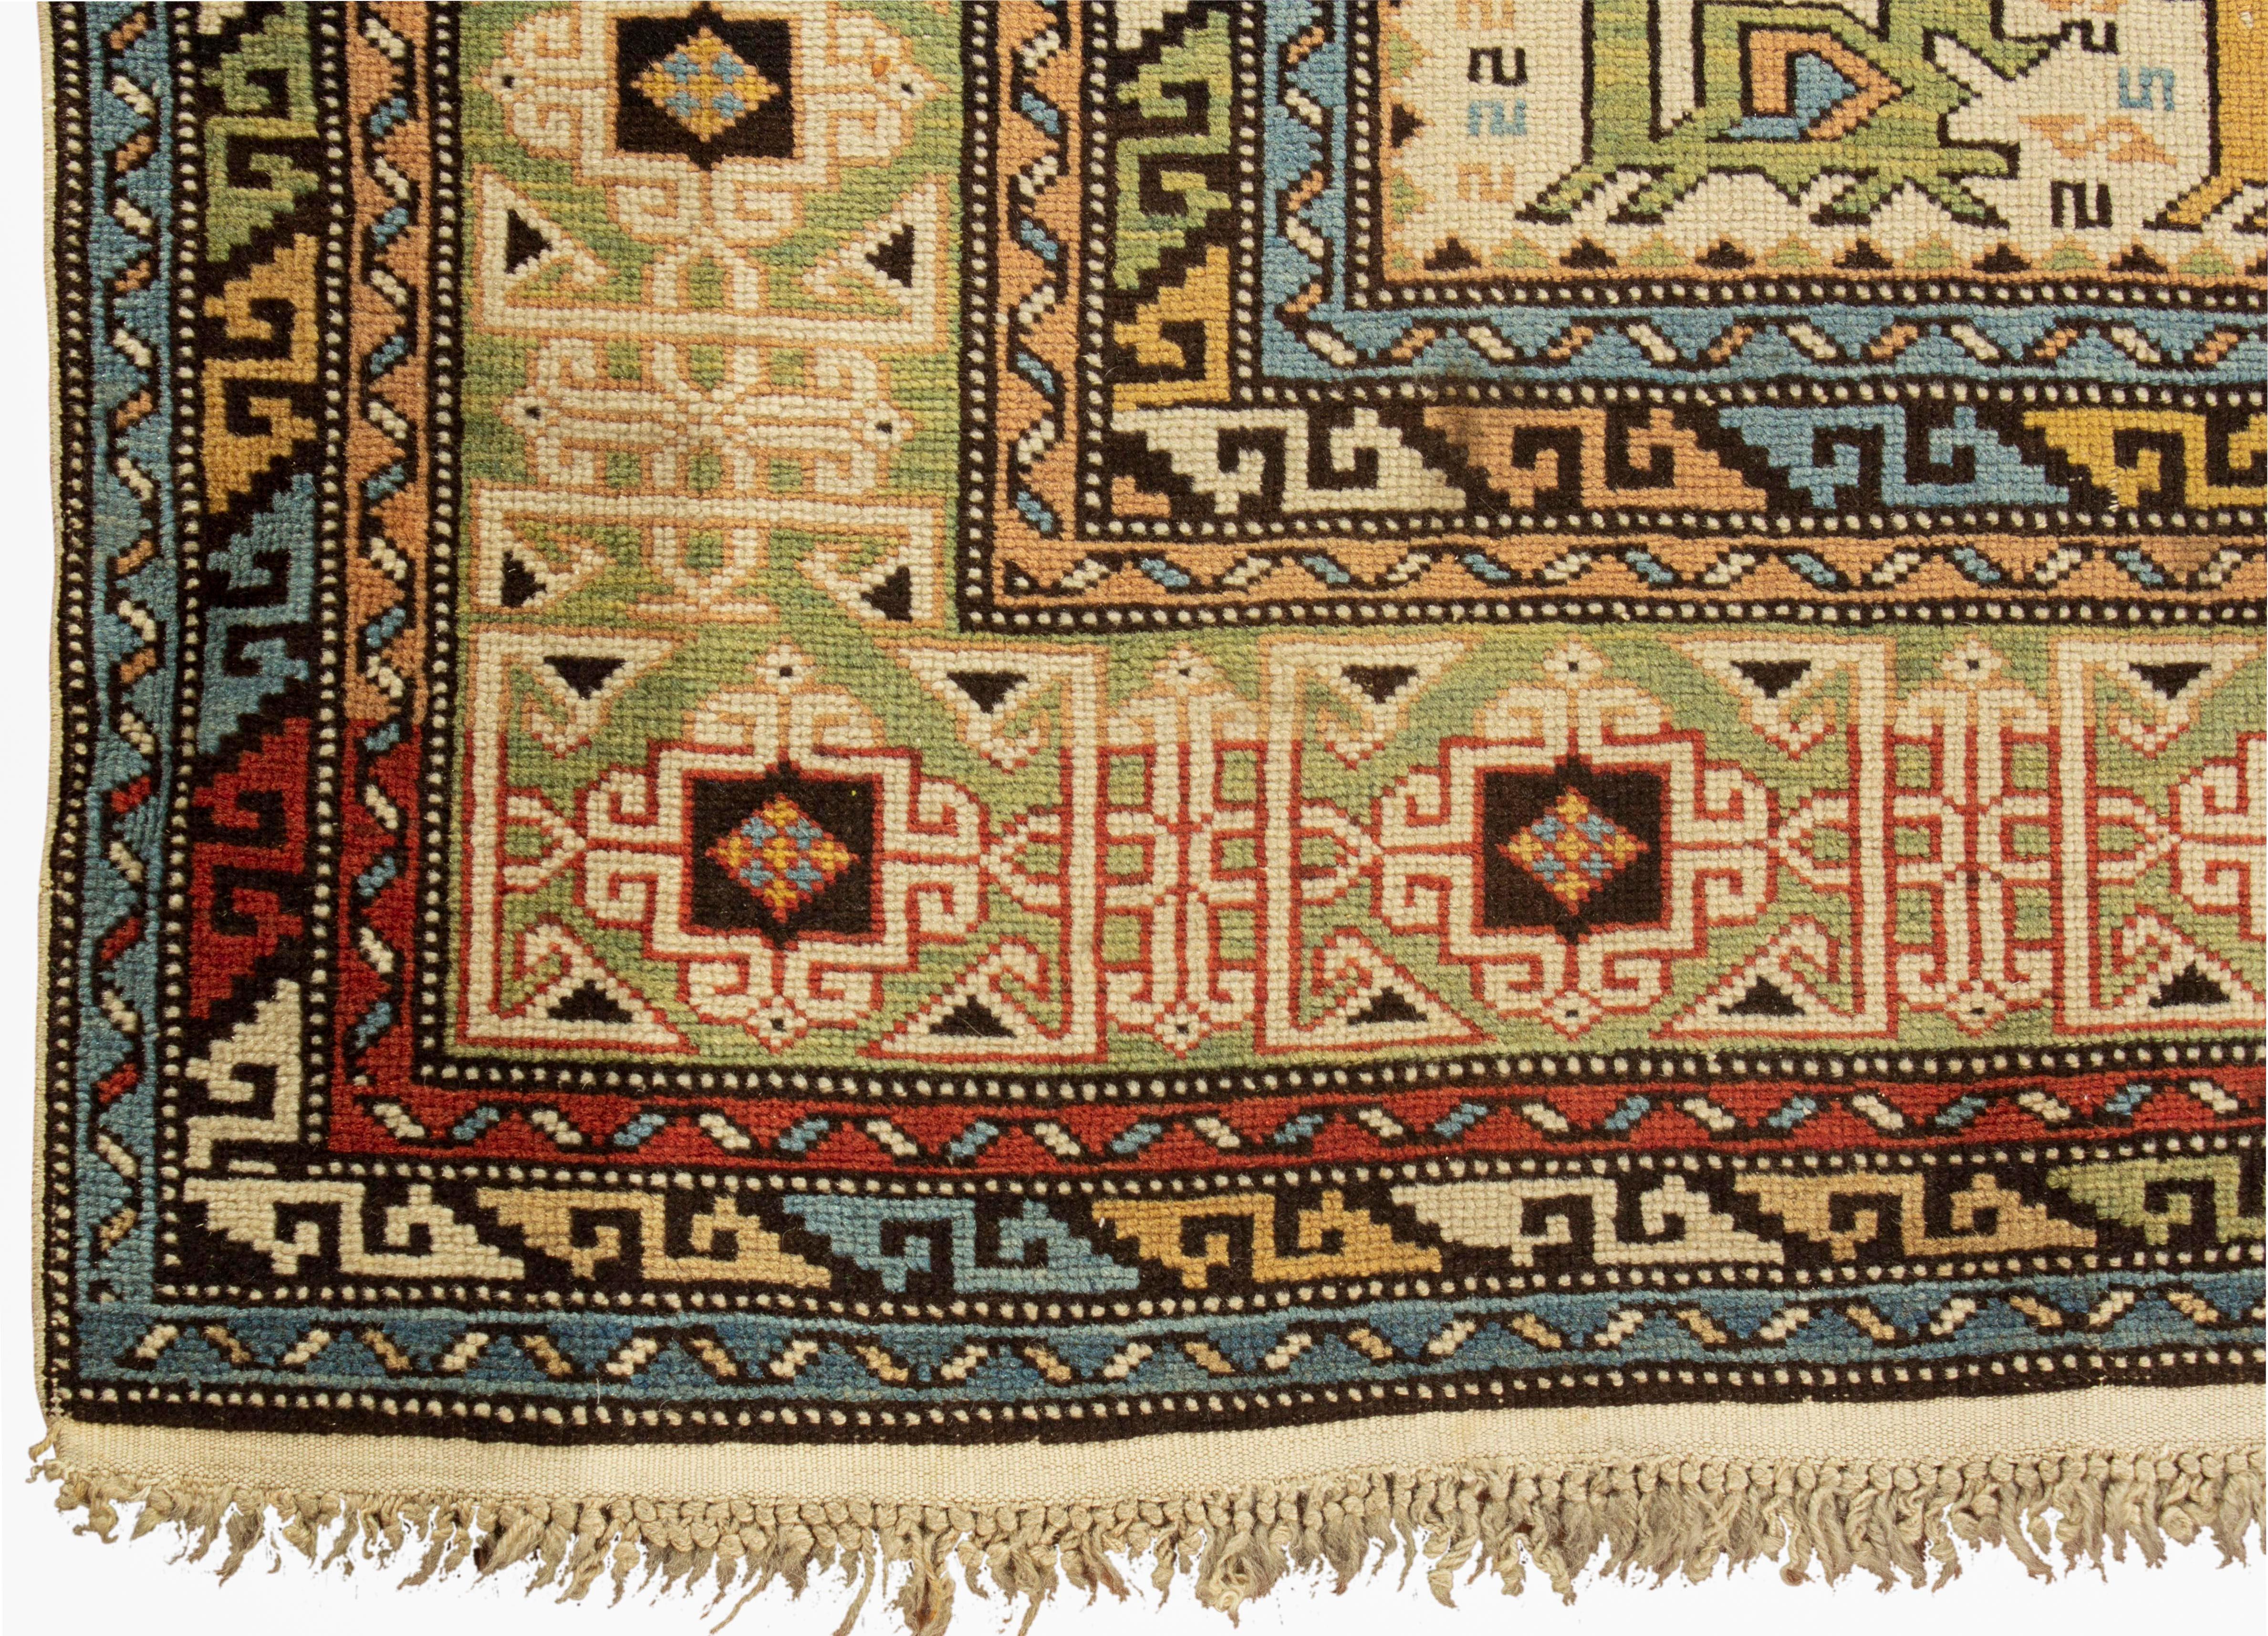 Antique Caucasian Perpedil Shirvan rug circa 1880 from the town of the same name situated to the southeast of Kuba in the Caucasian region of Daghestan. The main ivory field with the large Perpedil distinctive rams Horn design featured in soft blues